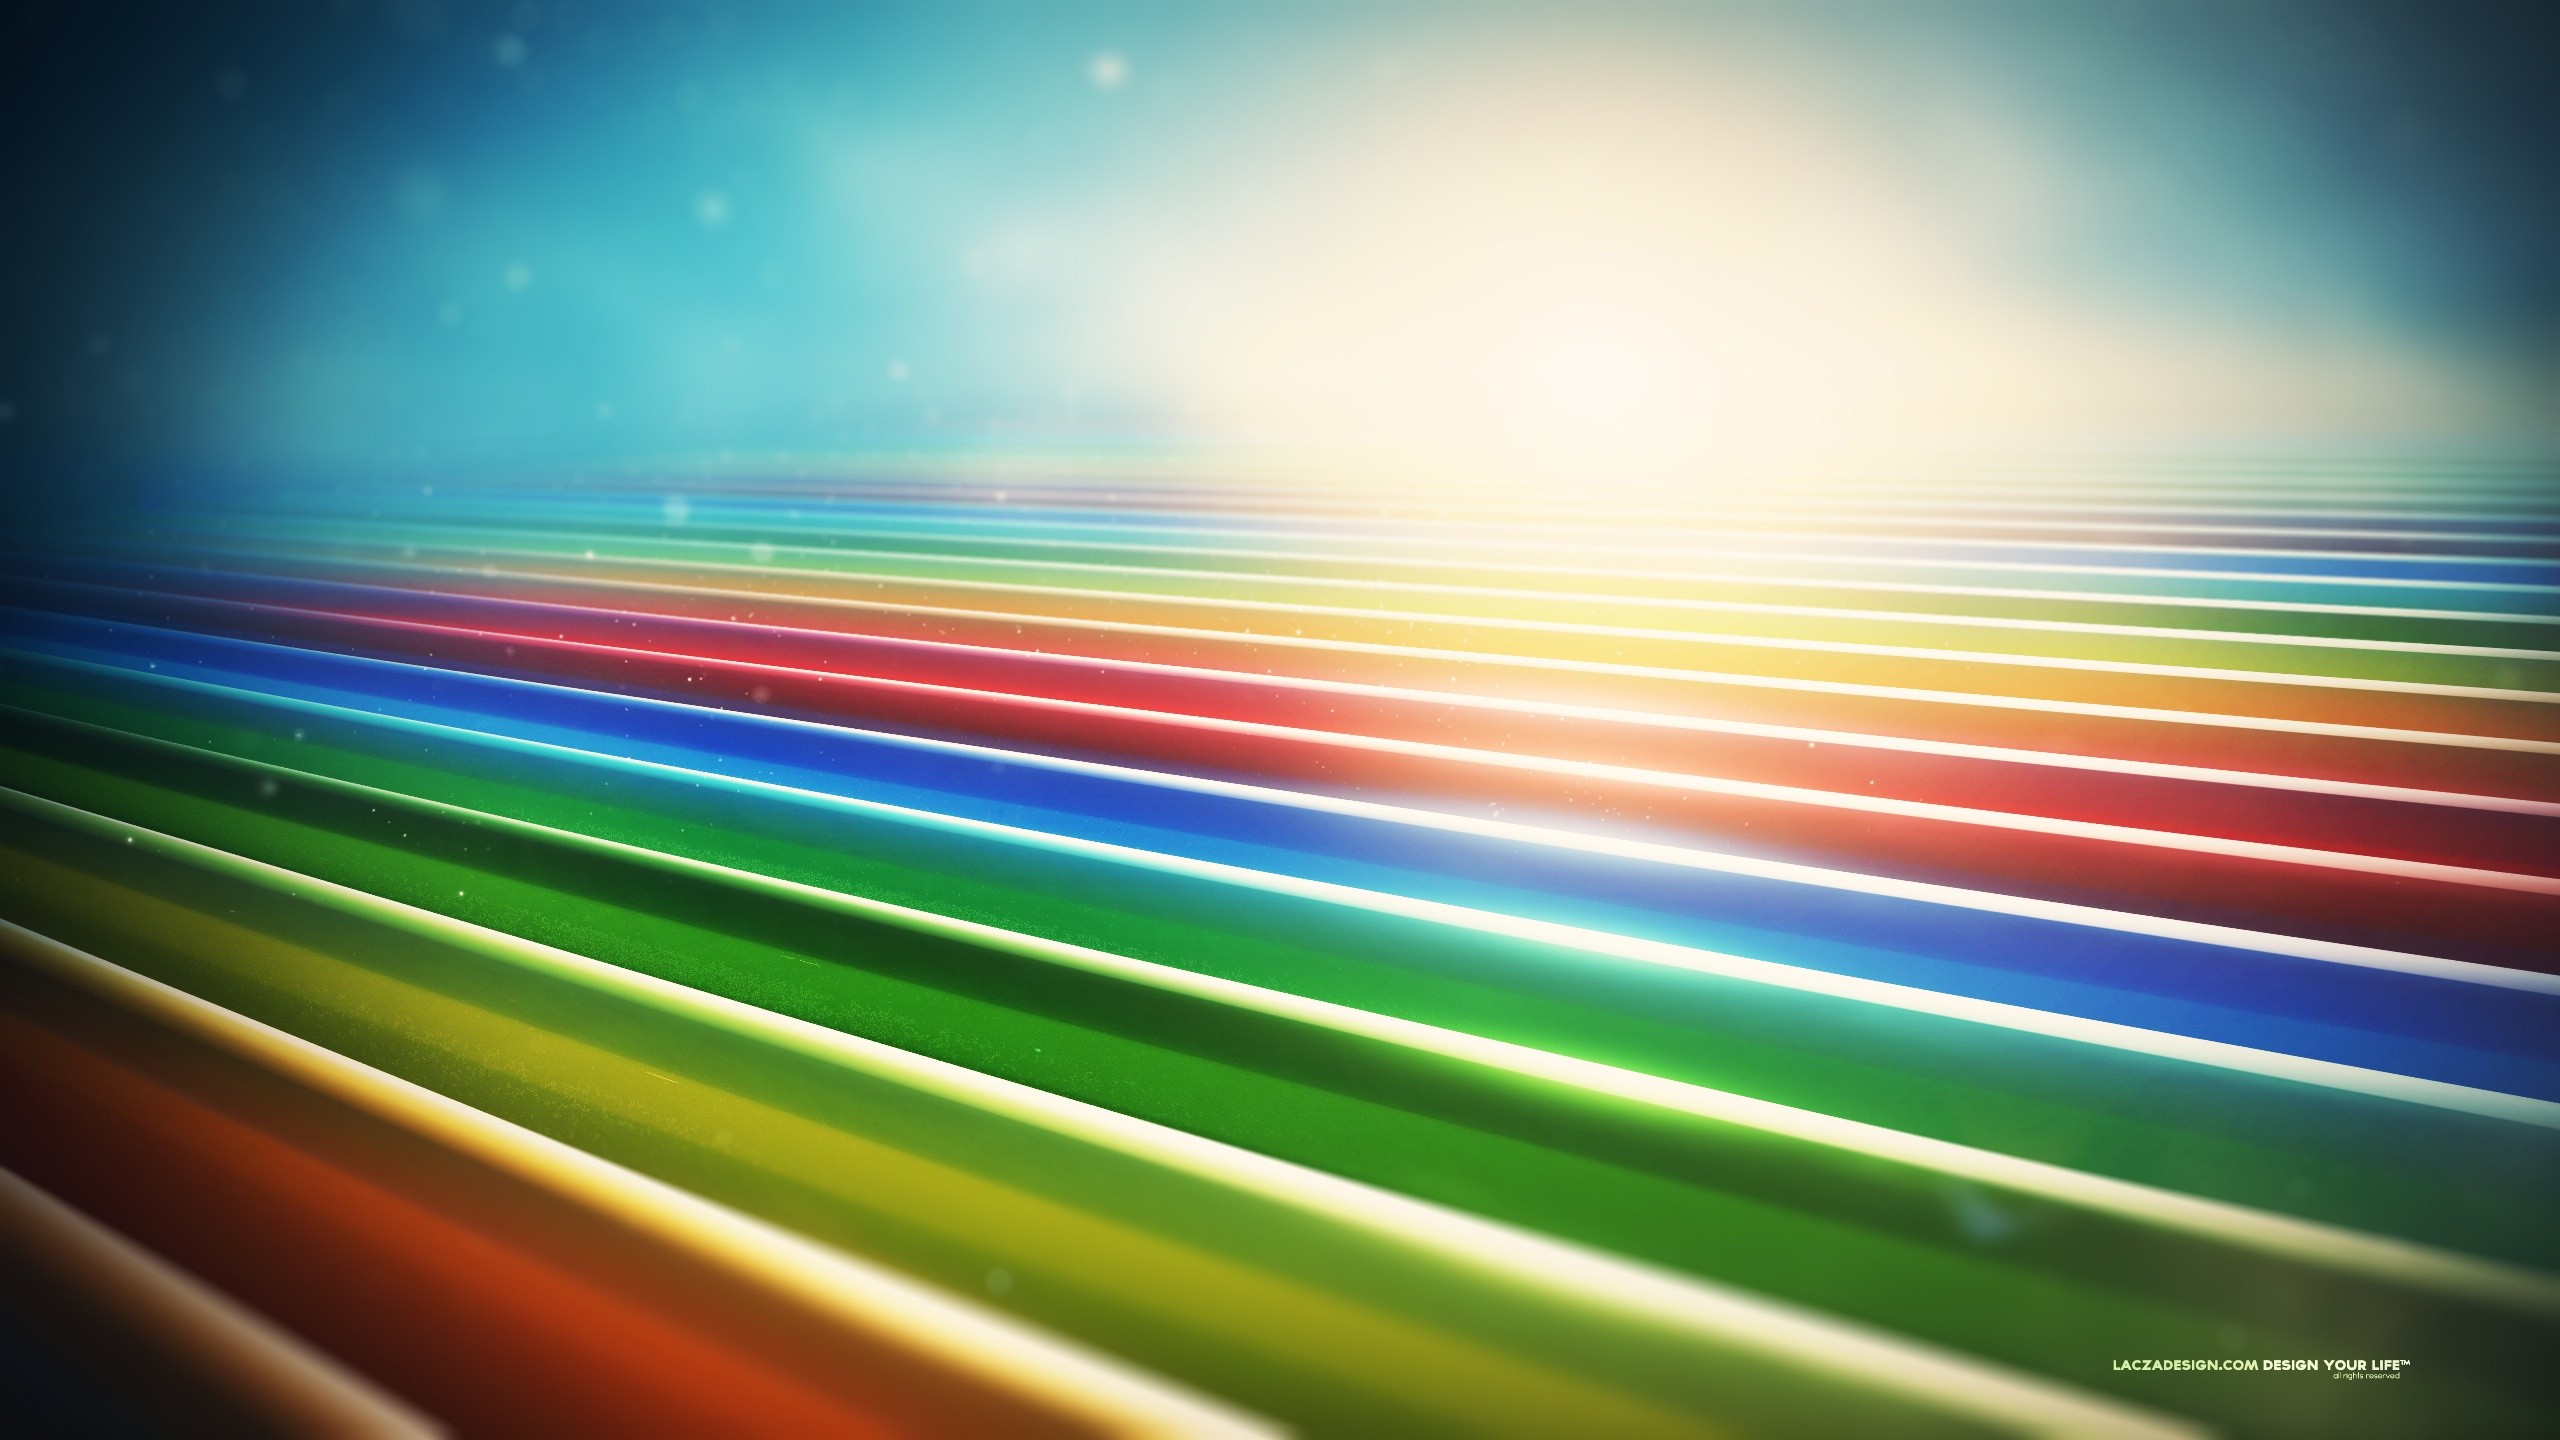 Abstract Lacza Colorful Digital Art Lines 2560x1440